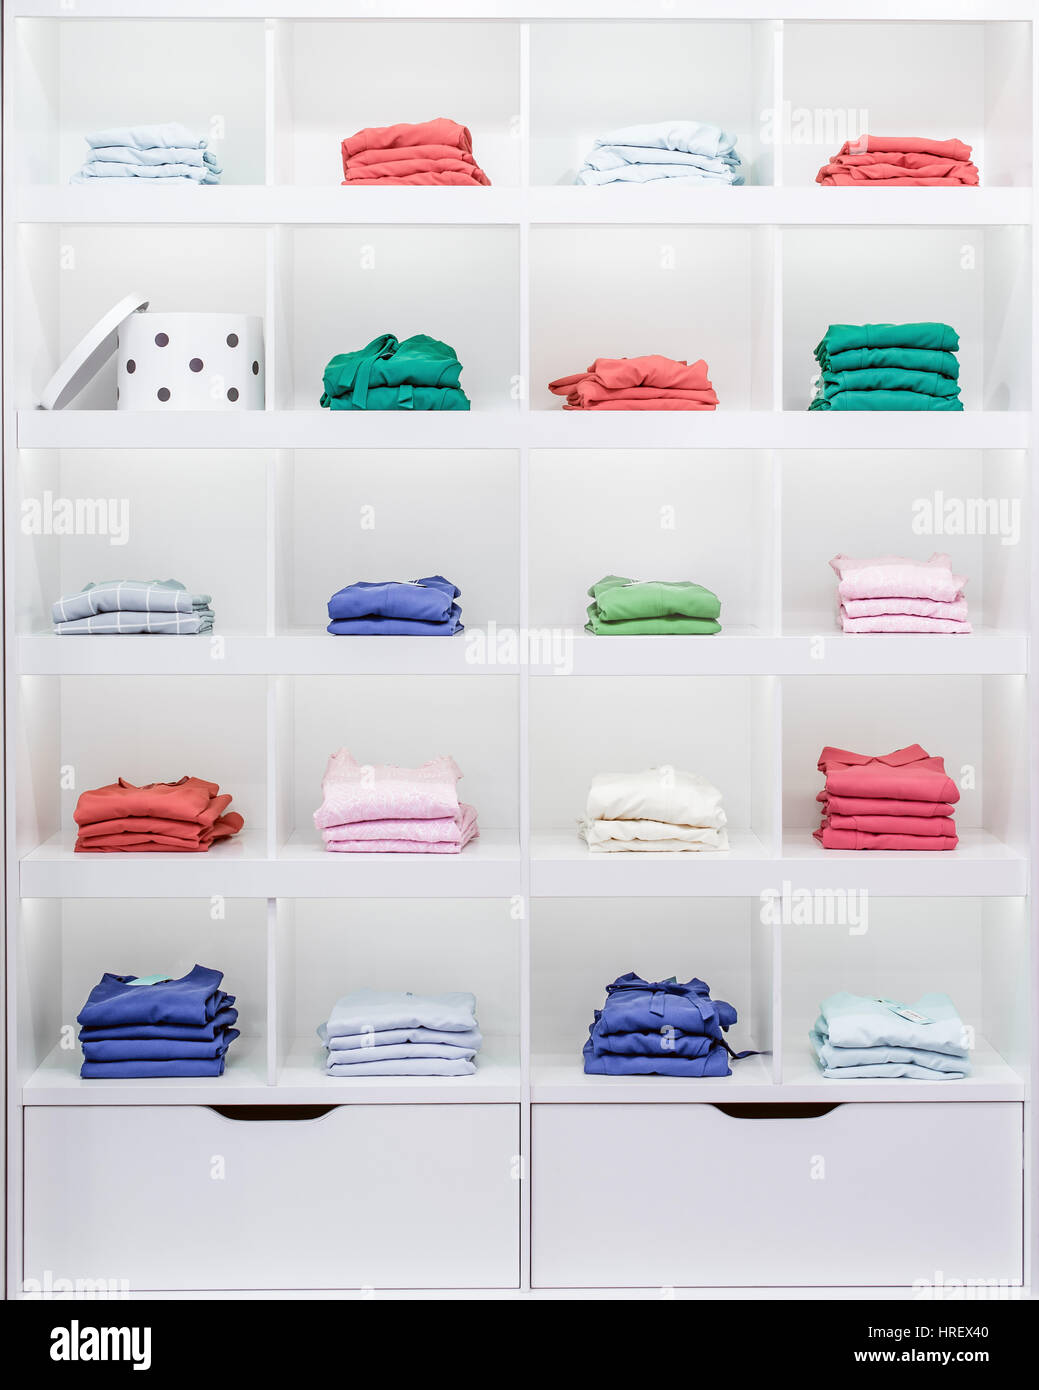 Shelves with clothes, showcase Stock Photo